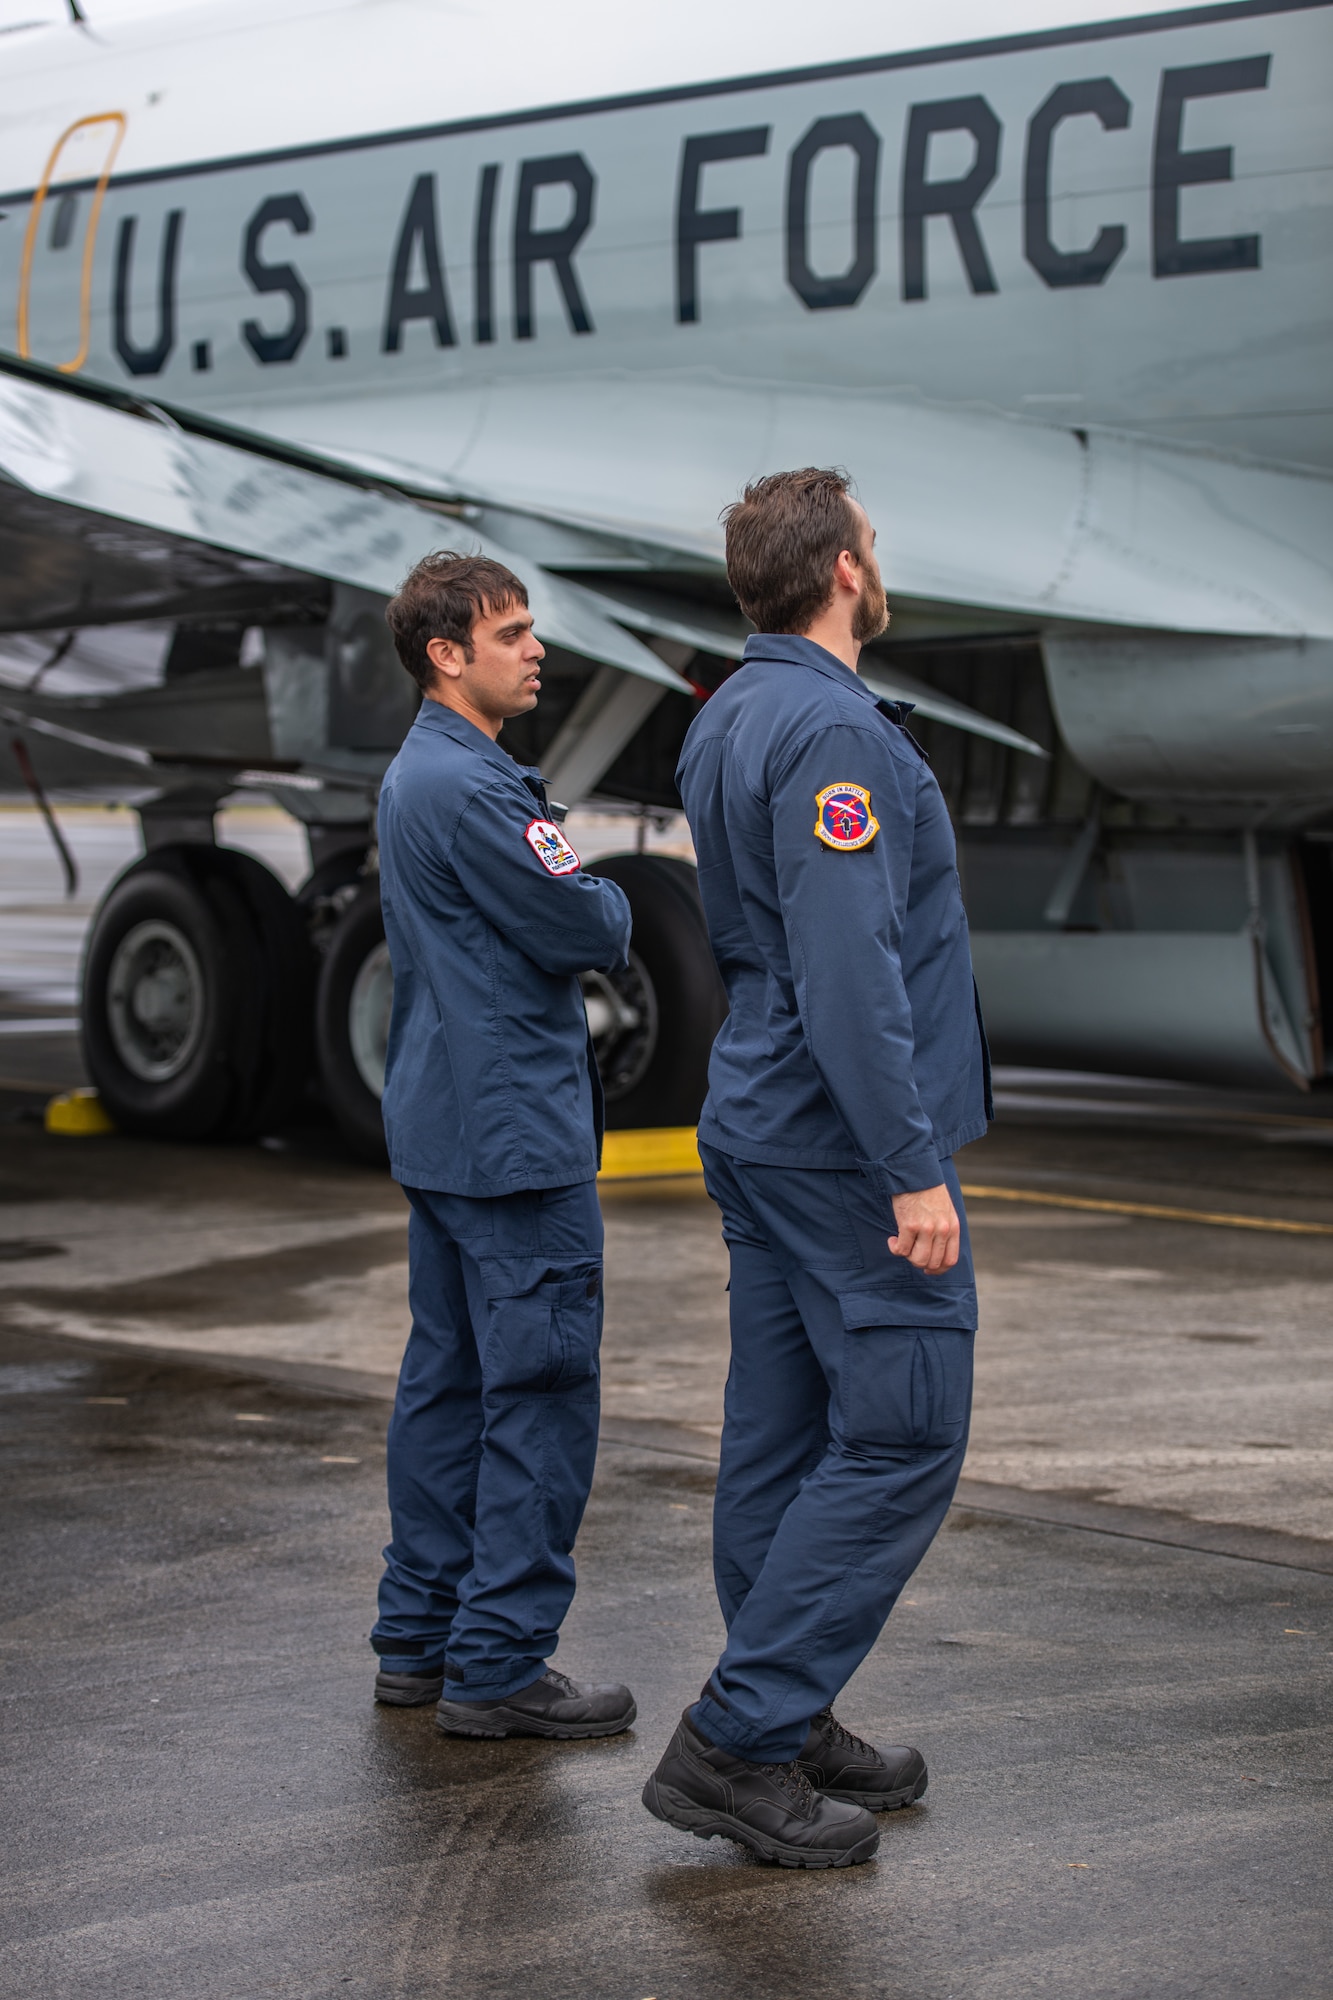 Two military members from New Zealand observe a U.S. Air Force plane